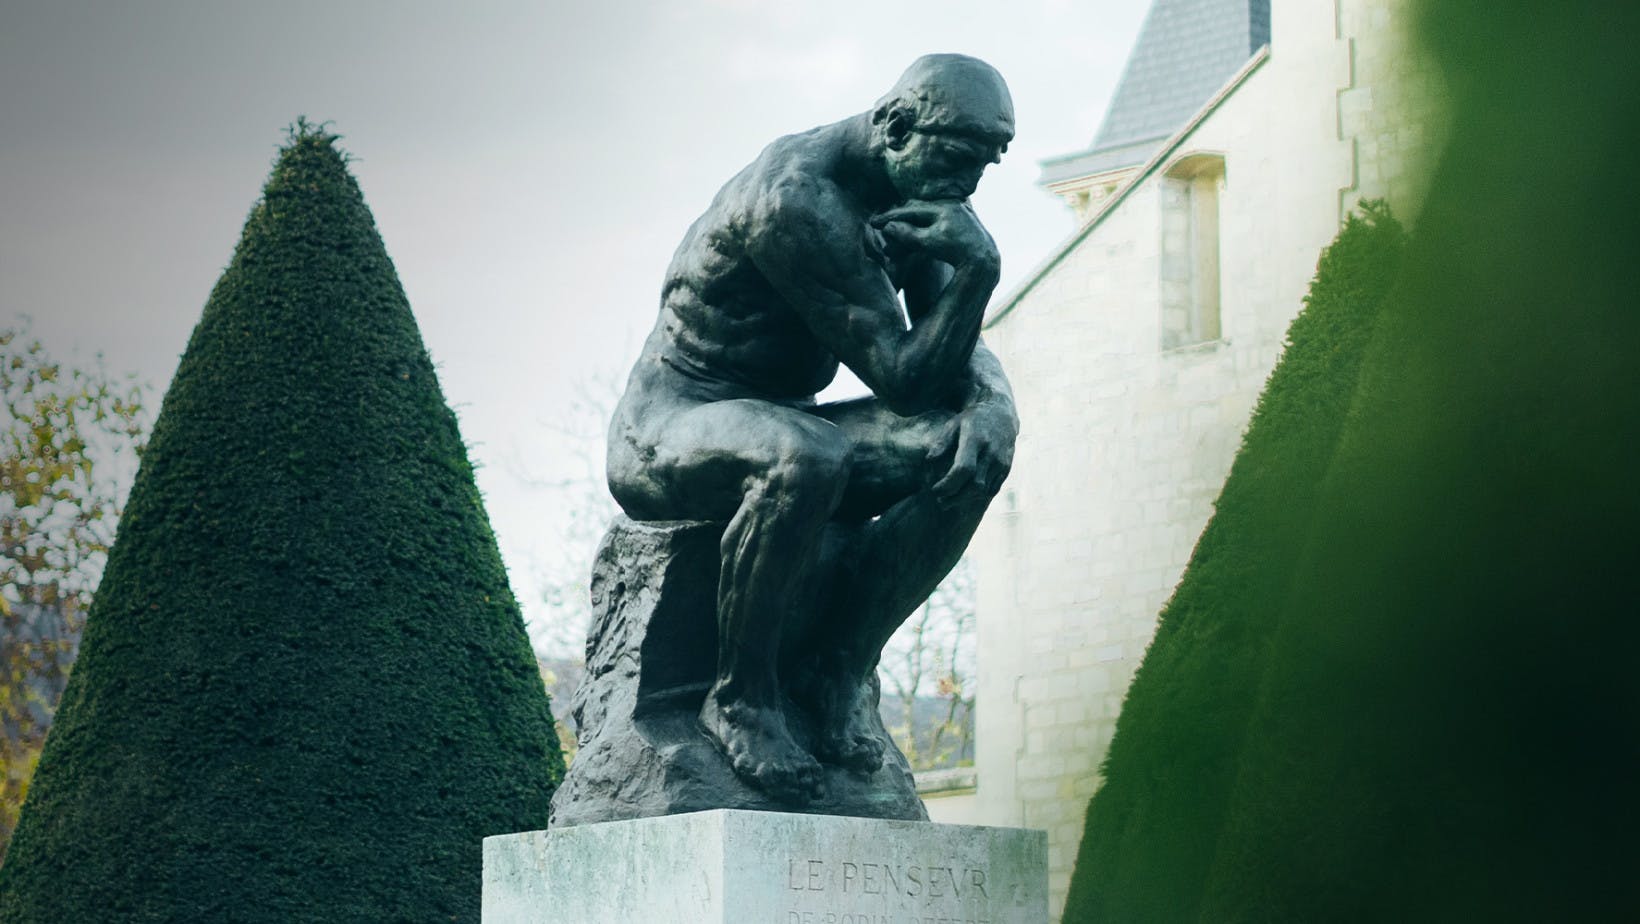 the thinker sculpture which represents liberal arts